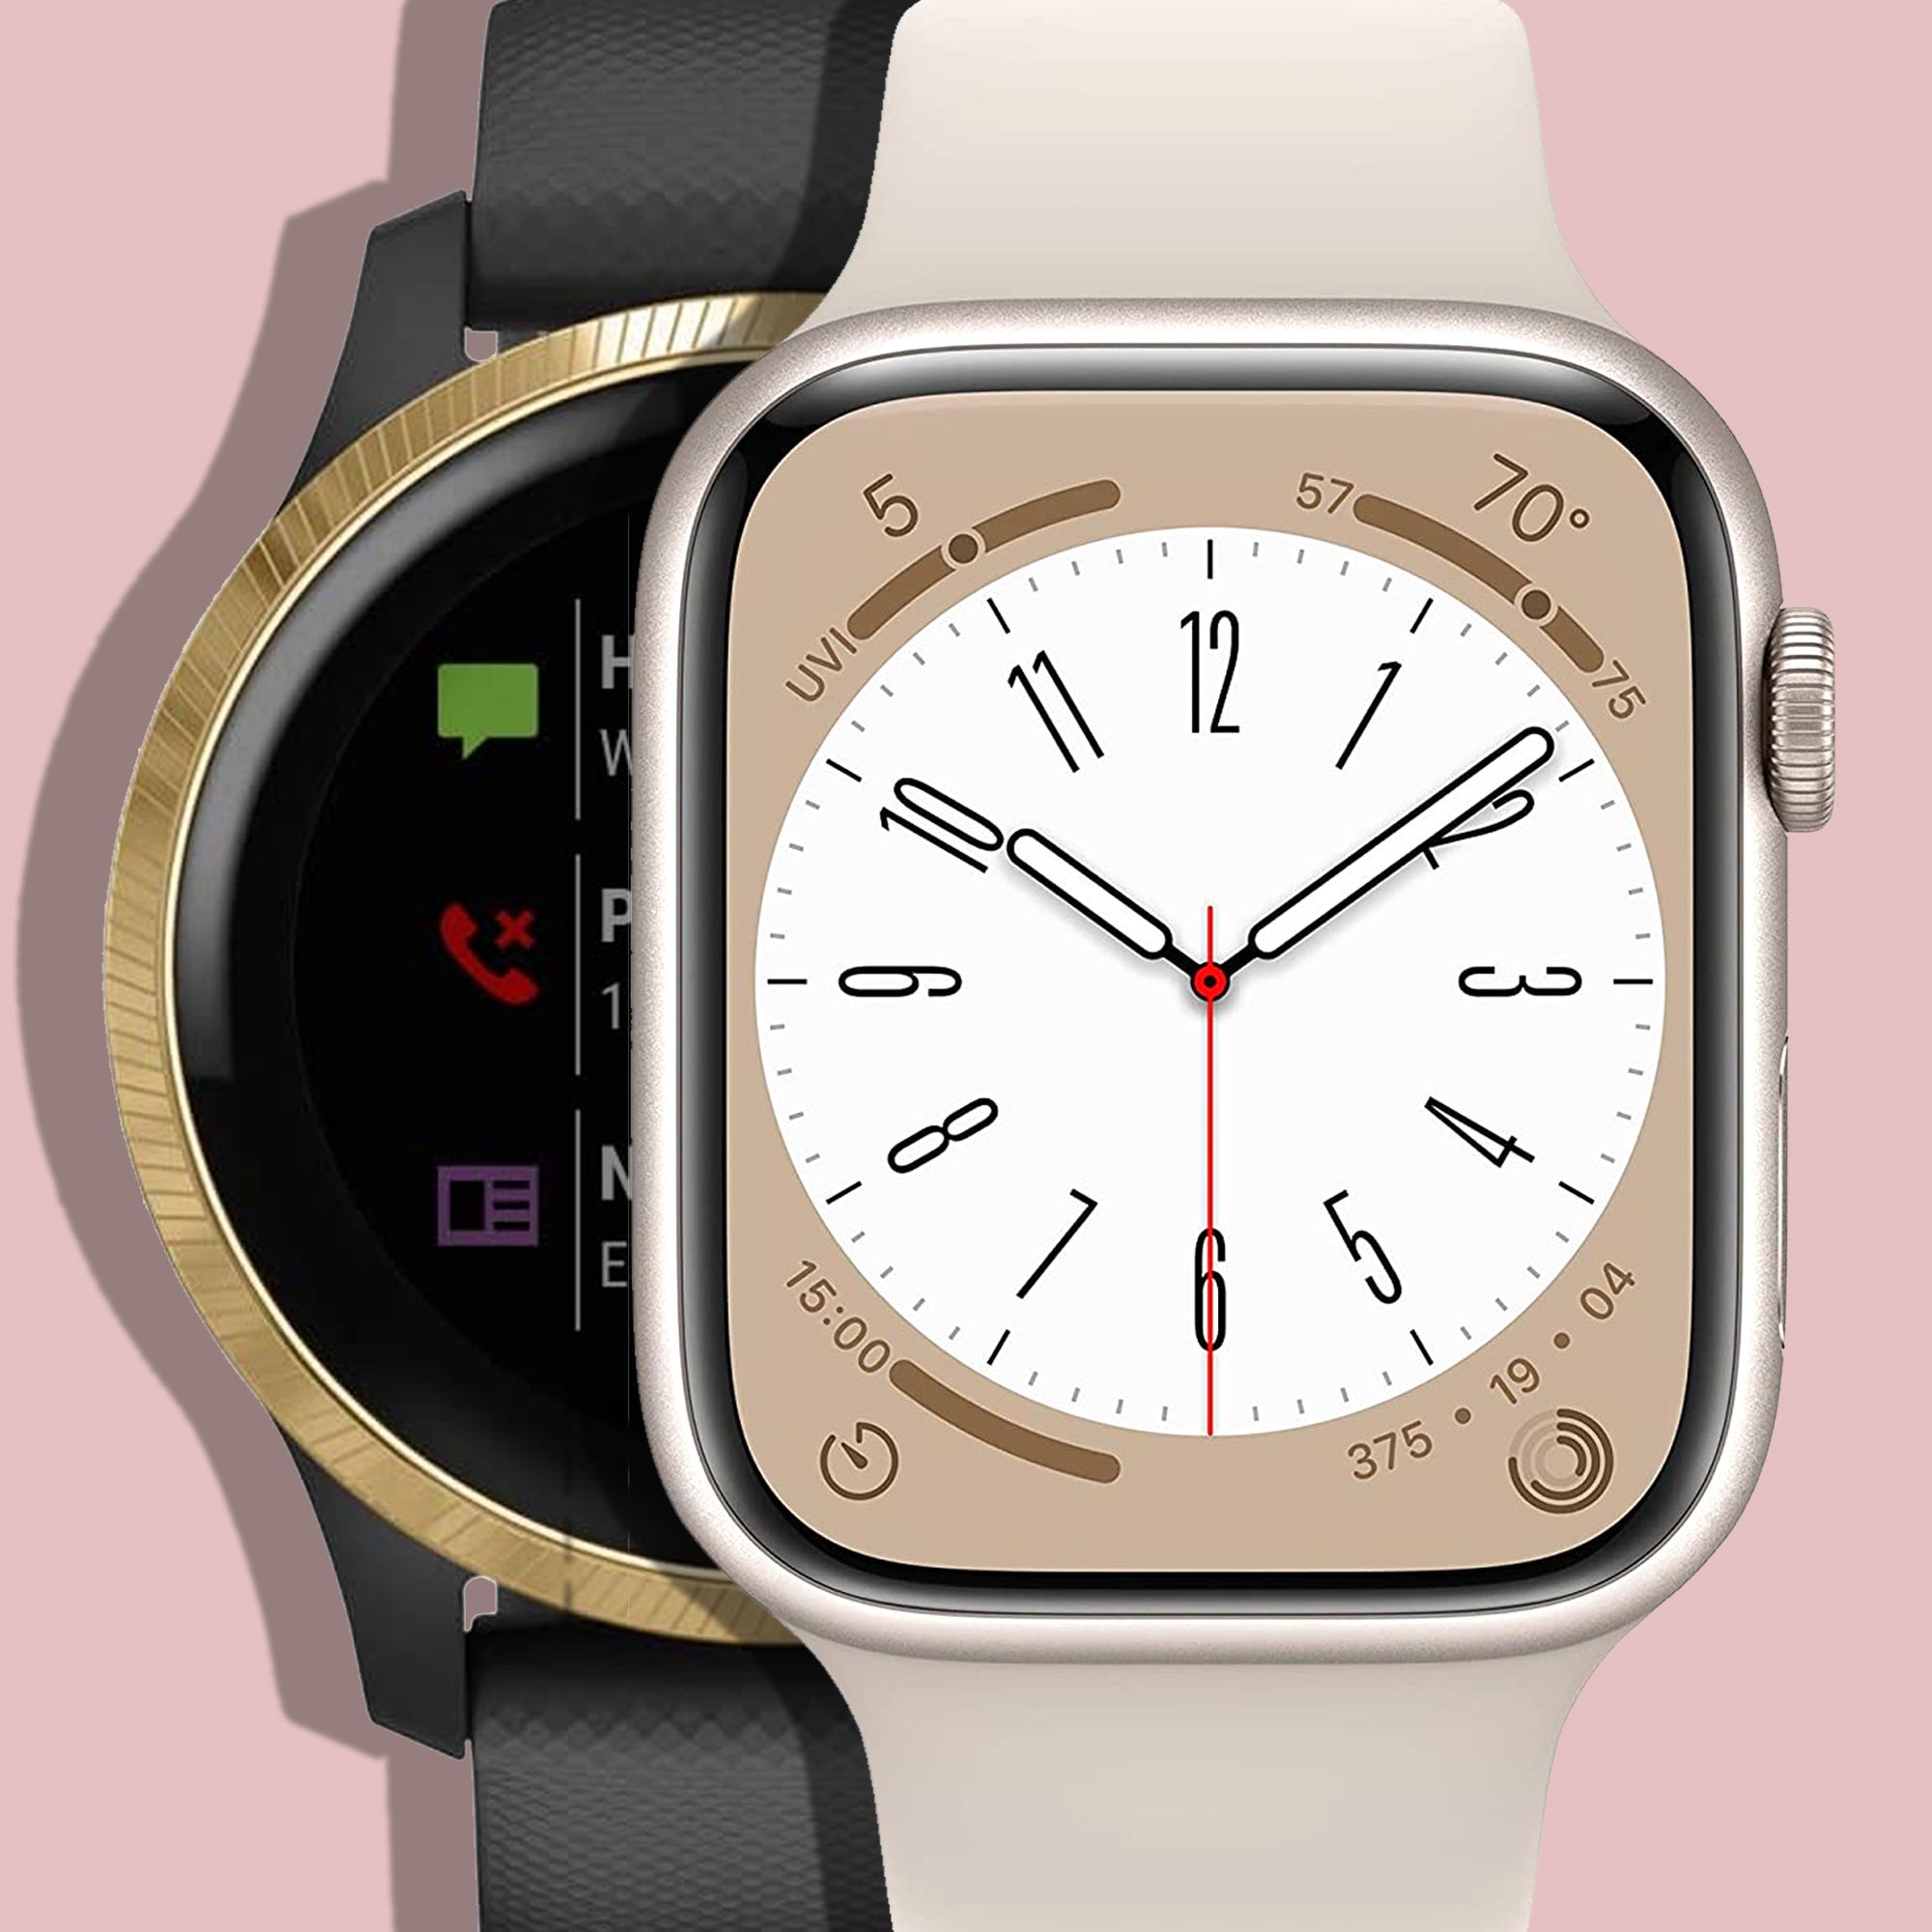 The Best Black Friday Smartwatch Deals Have Landed Early